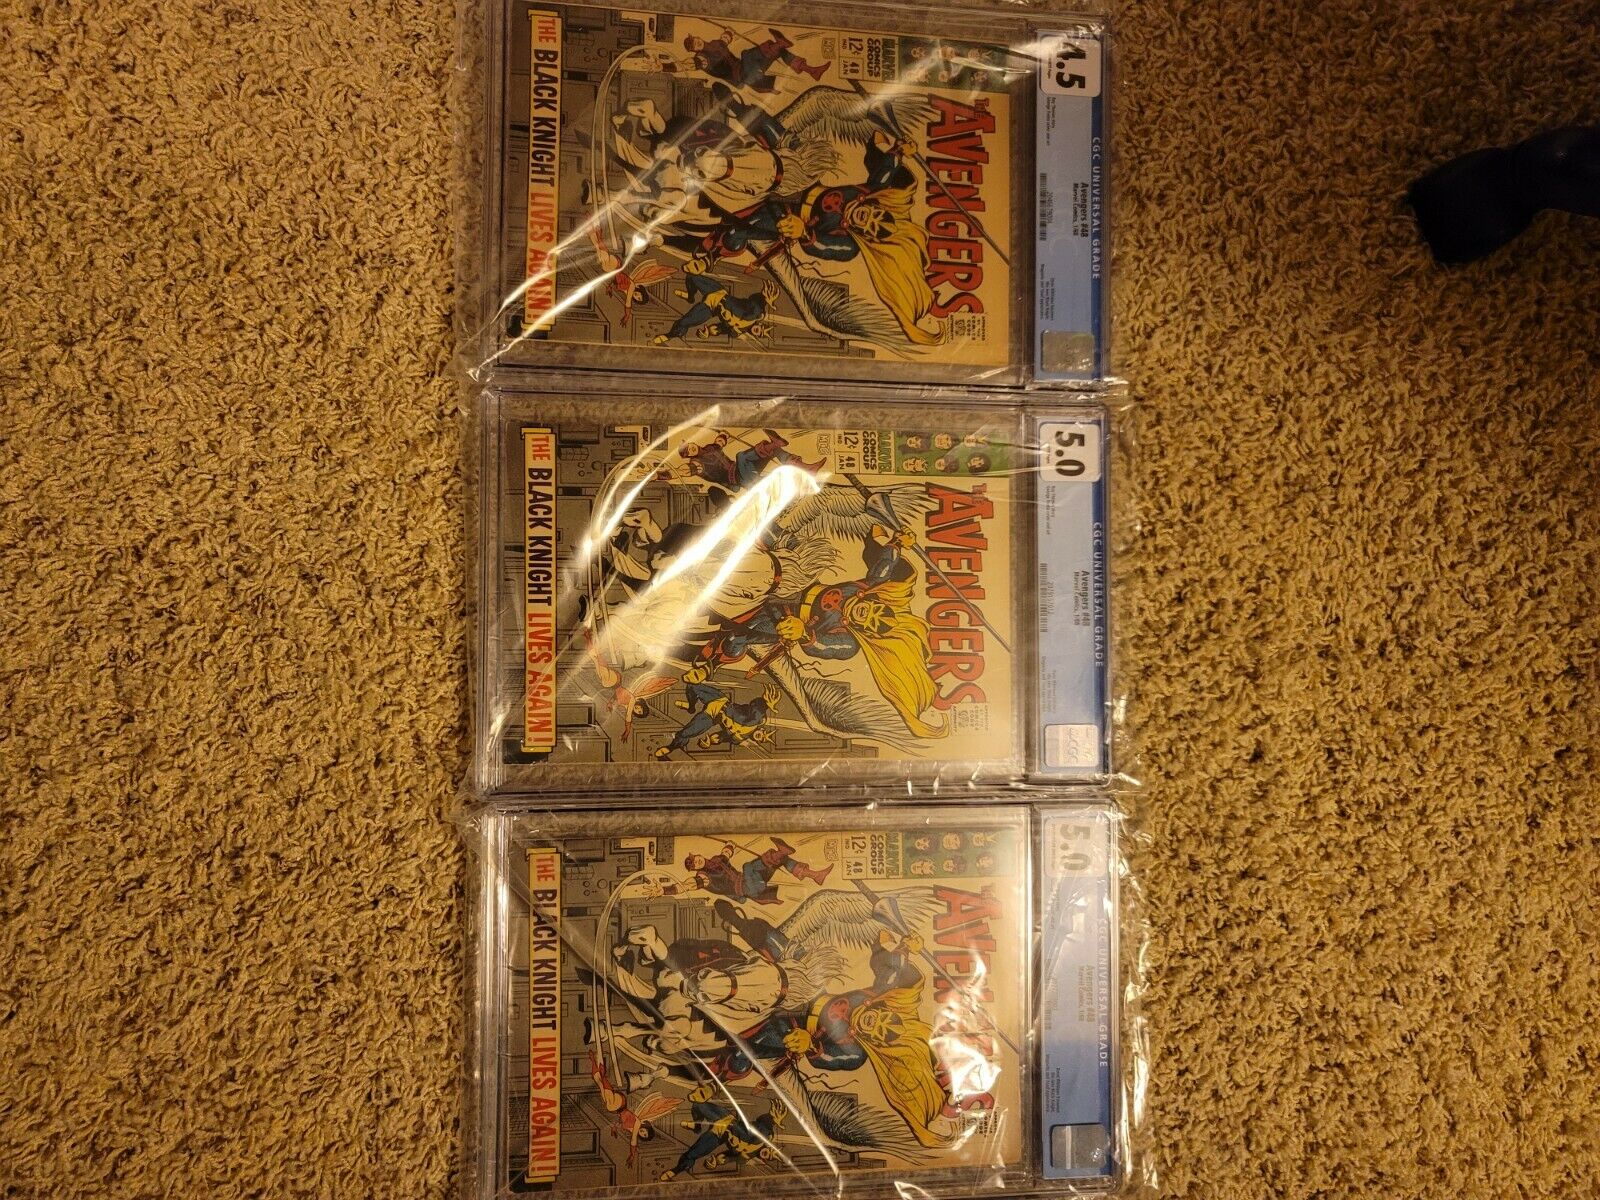 Avengers 48 CGC lot of 3 books 50 50 and 45